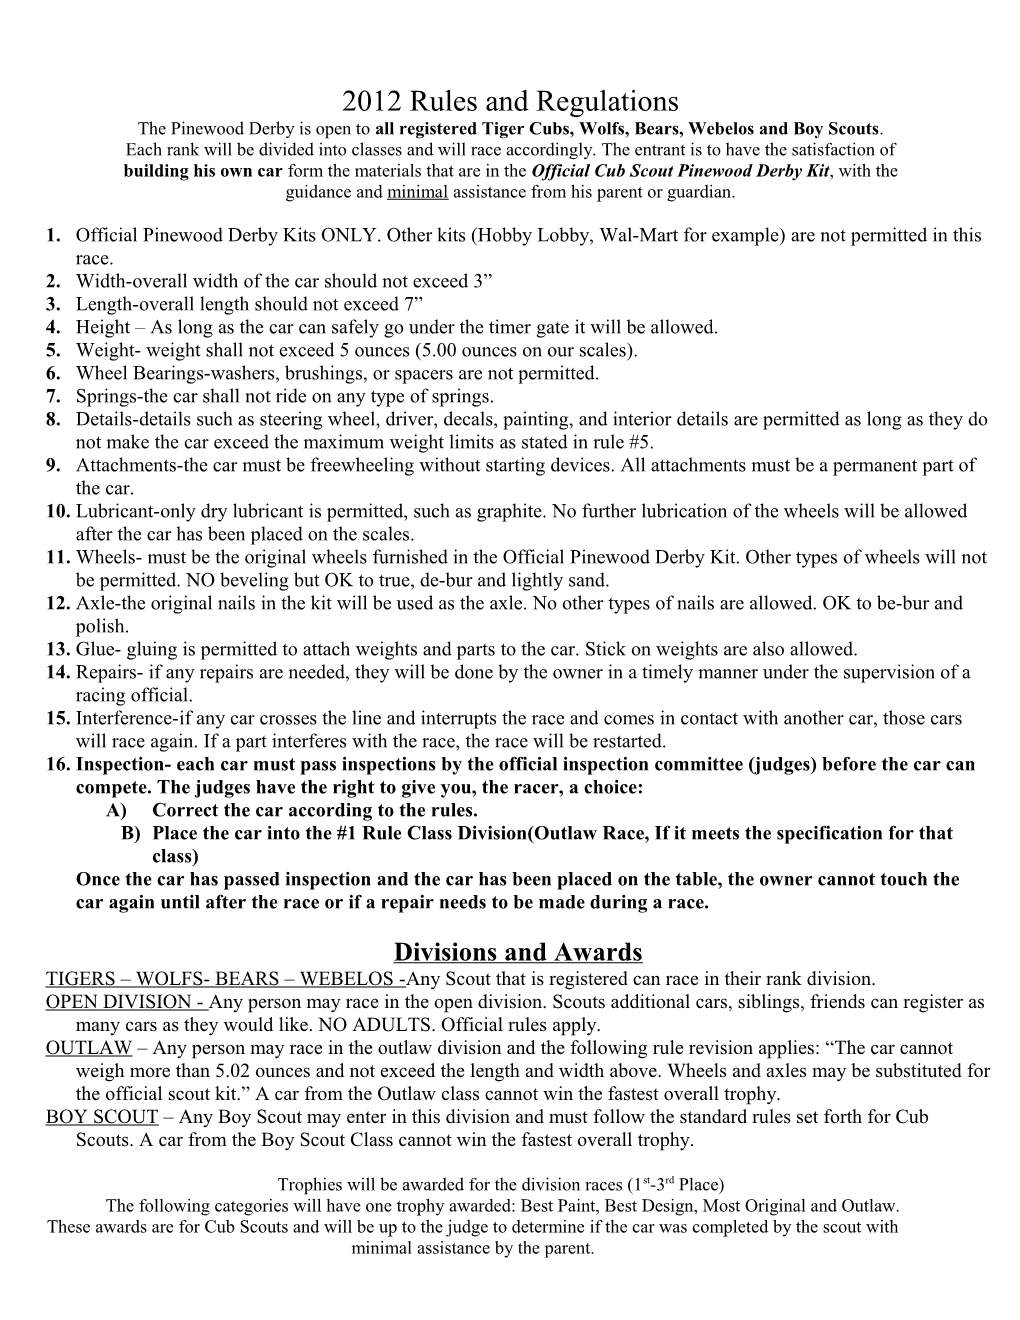 Rules and Regulations s7